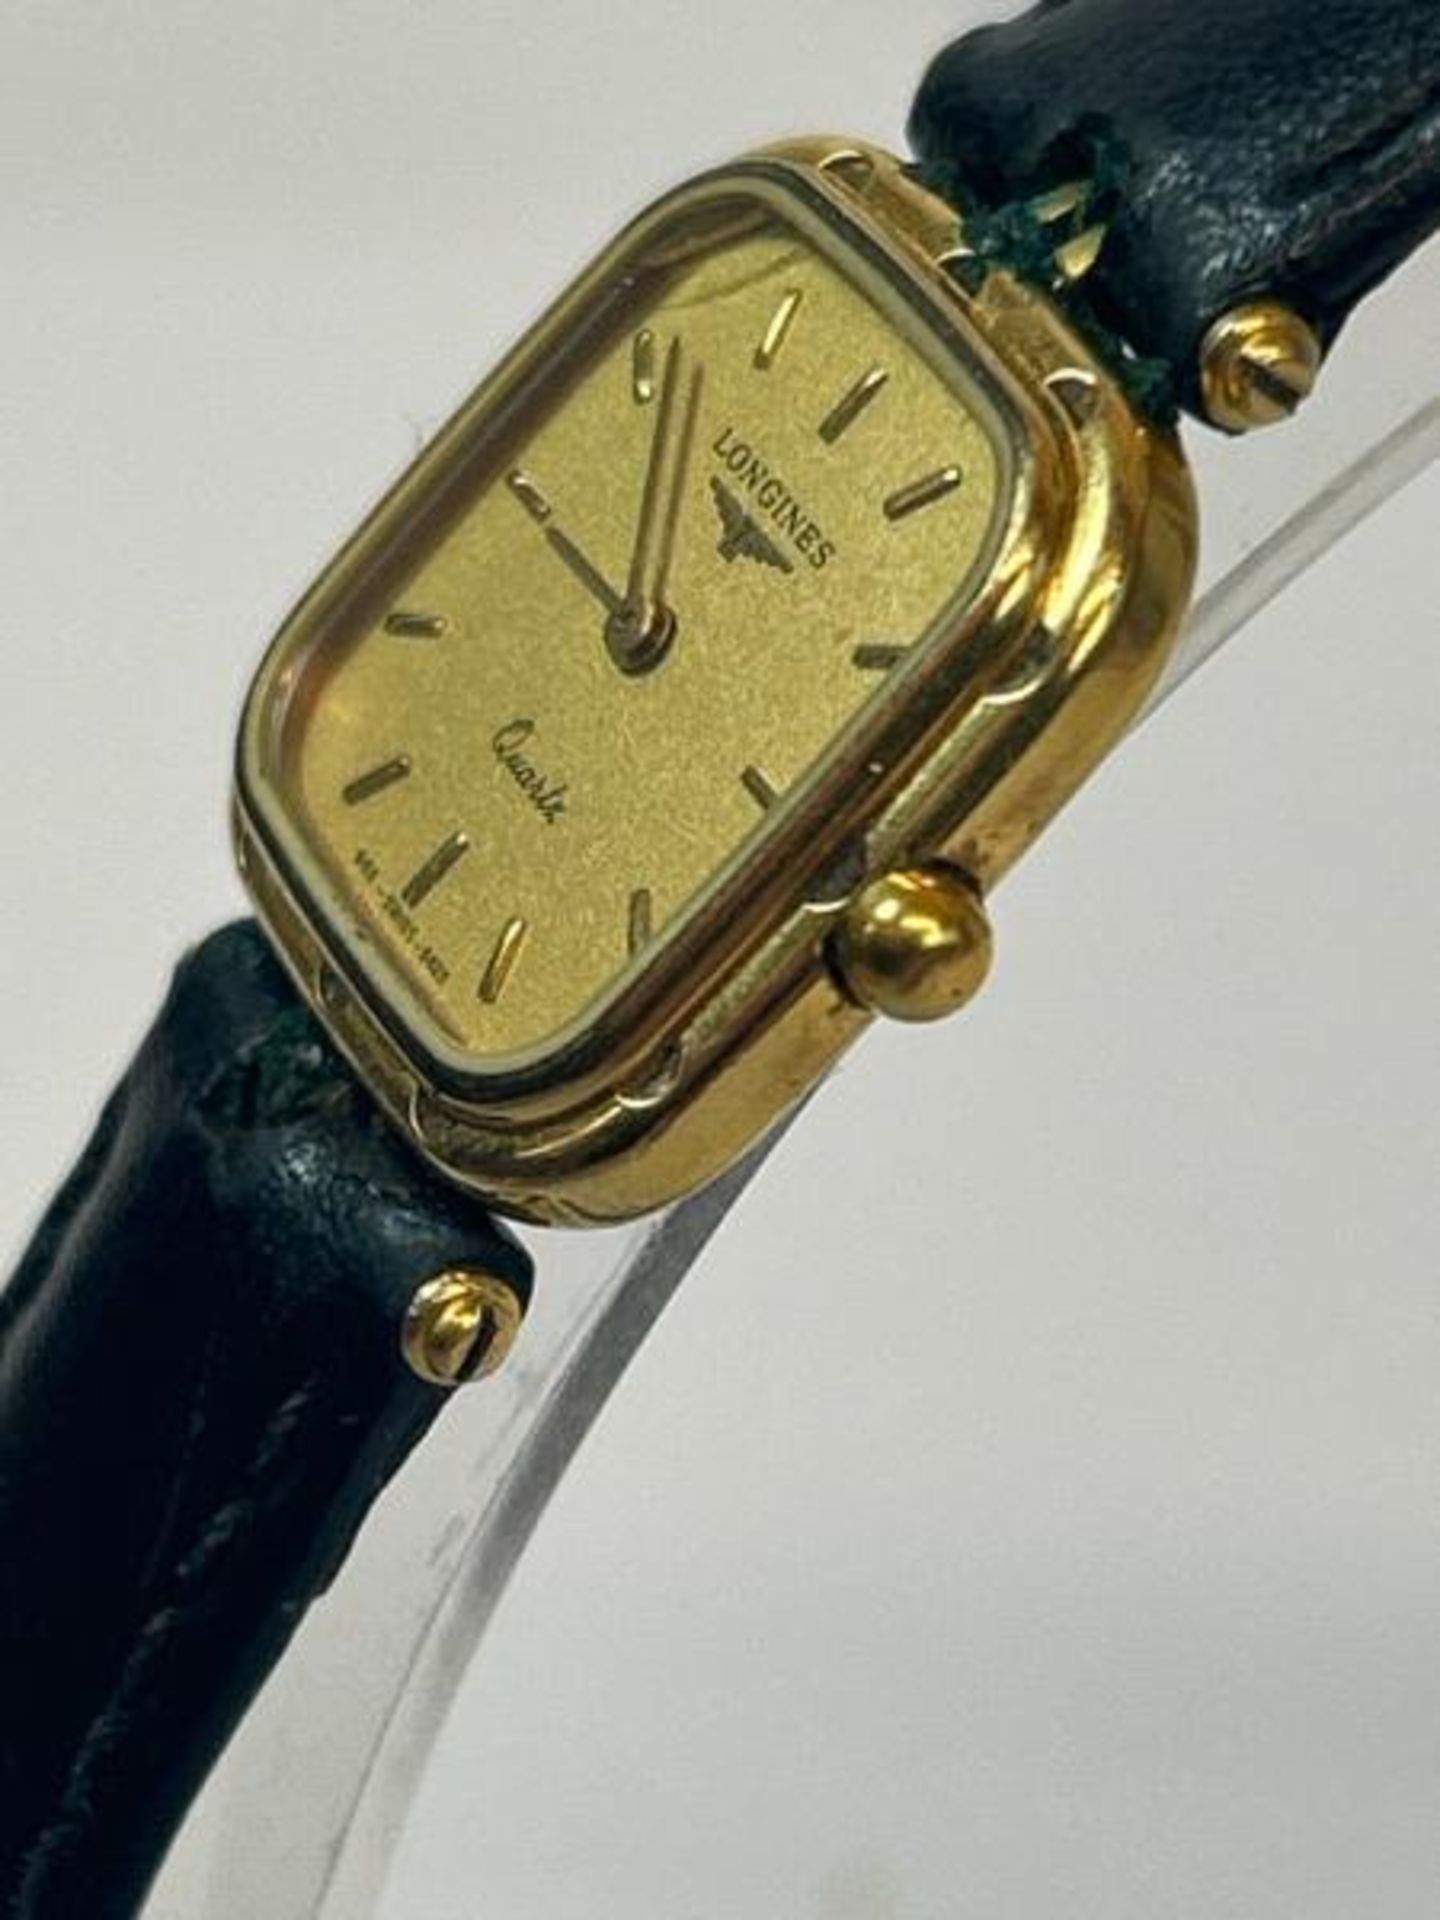 Vintage Longines gold plated wristwatch no.21712443 with quartz movement on black leather strap / SF - Image 2 of 5